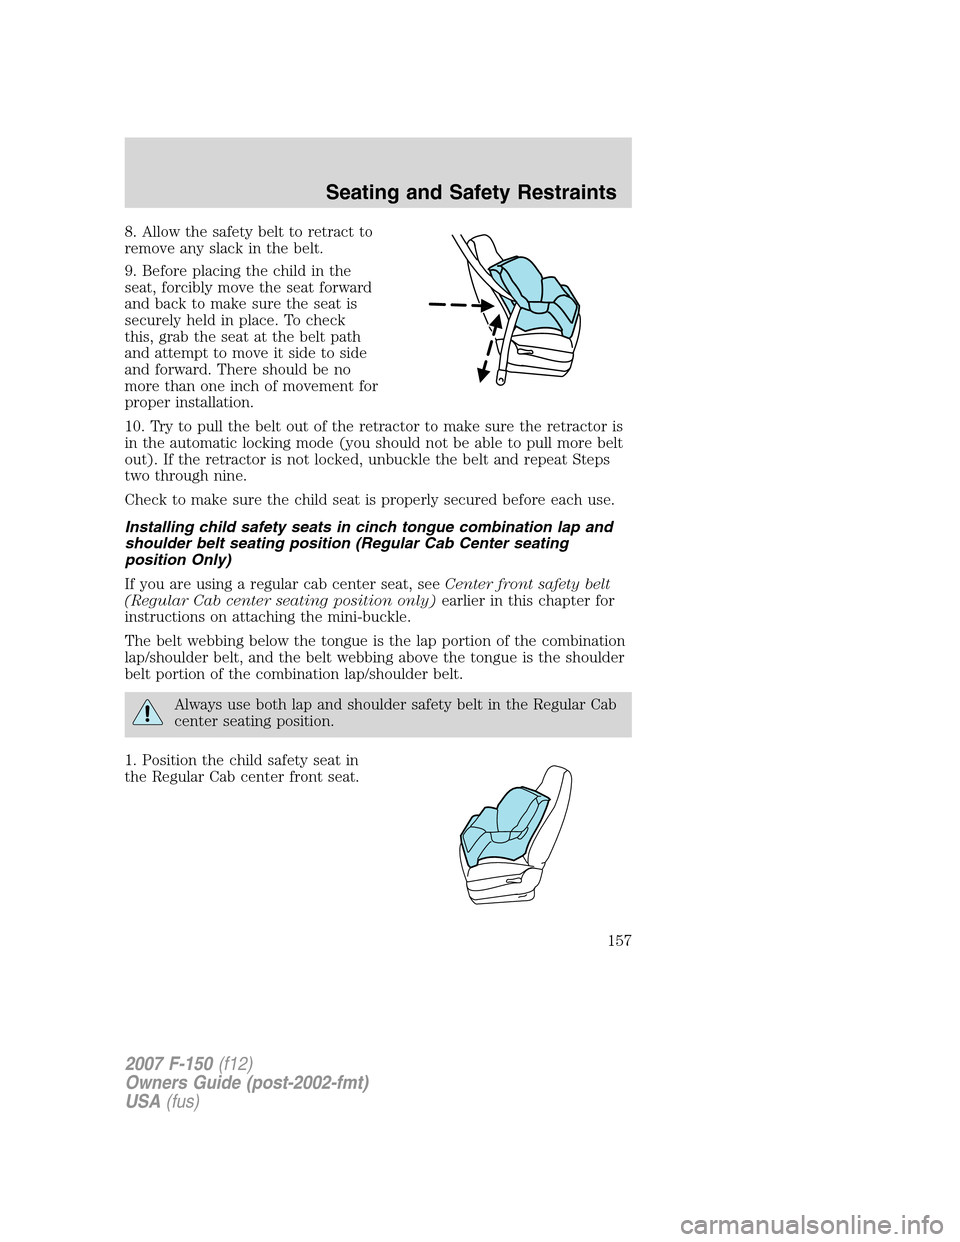 FORD F150 2007 11.G Owners Manual 8. Allow the safety belt to retract to
remove any slack in the belt.
9. Before placing the child in the
seat, forcibly move the seat forward
and back to make sure the seat is
securely held in place. T